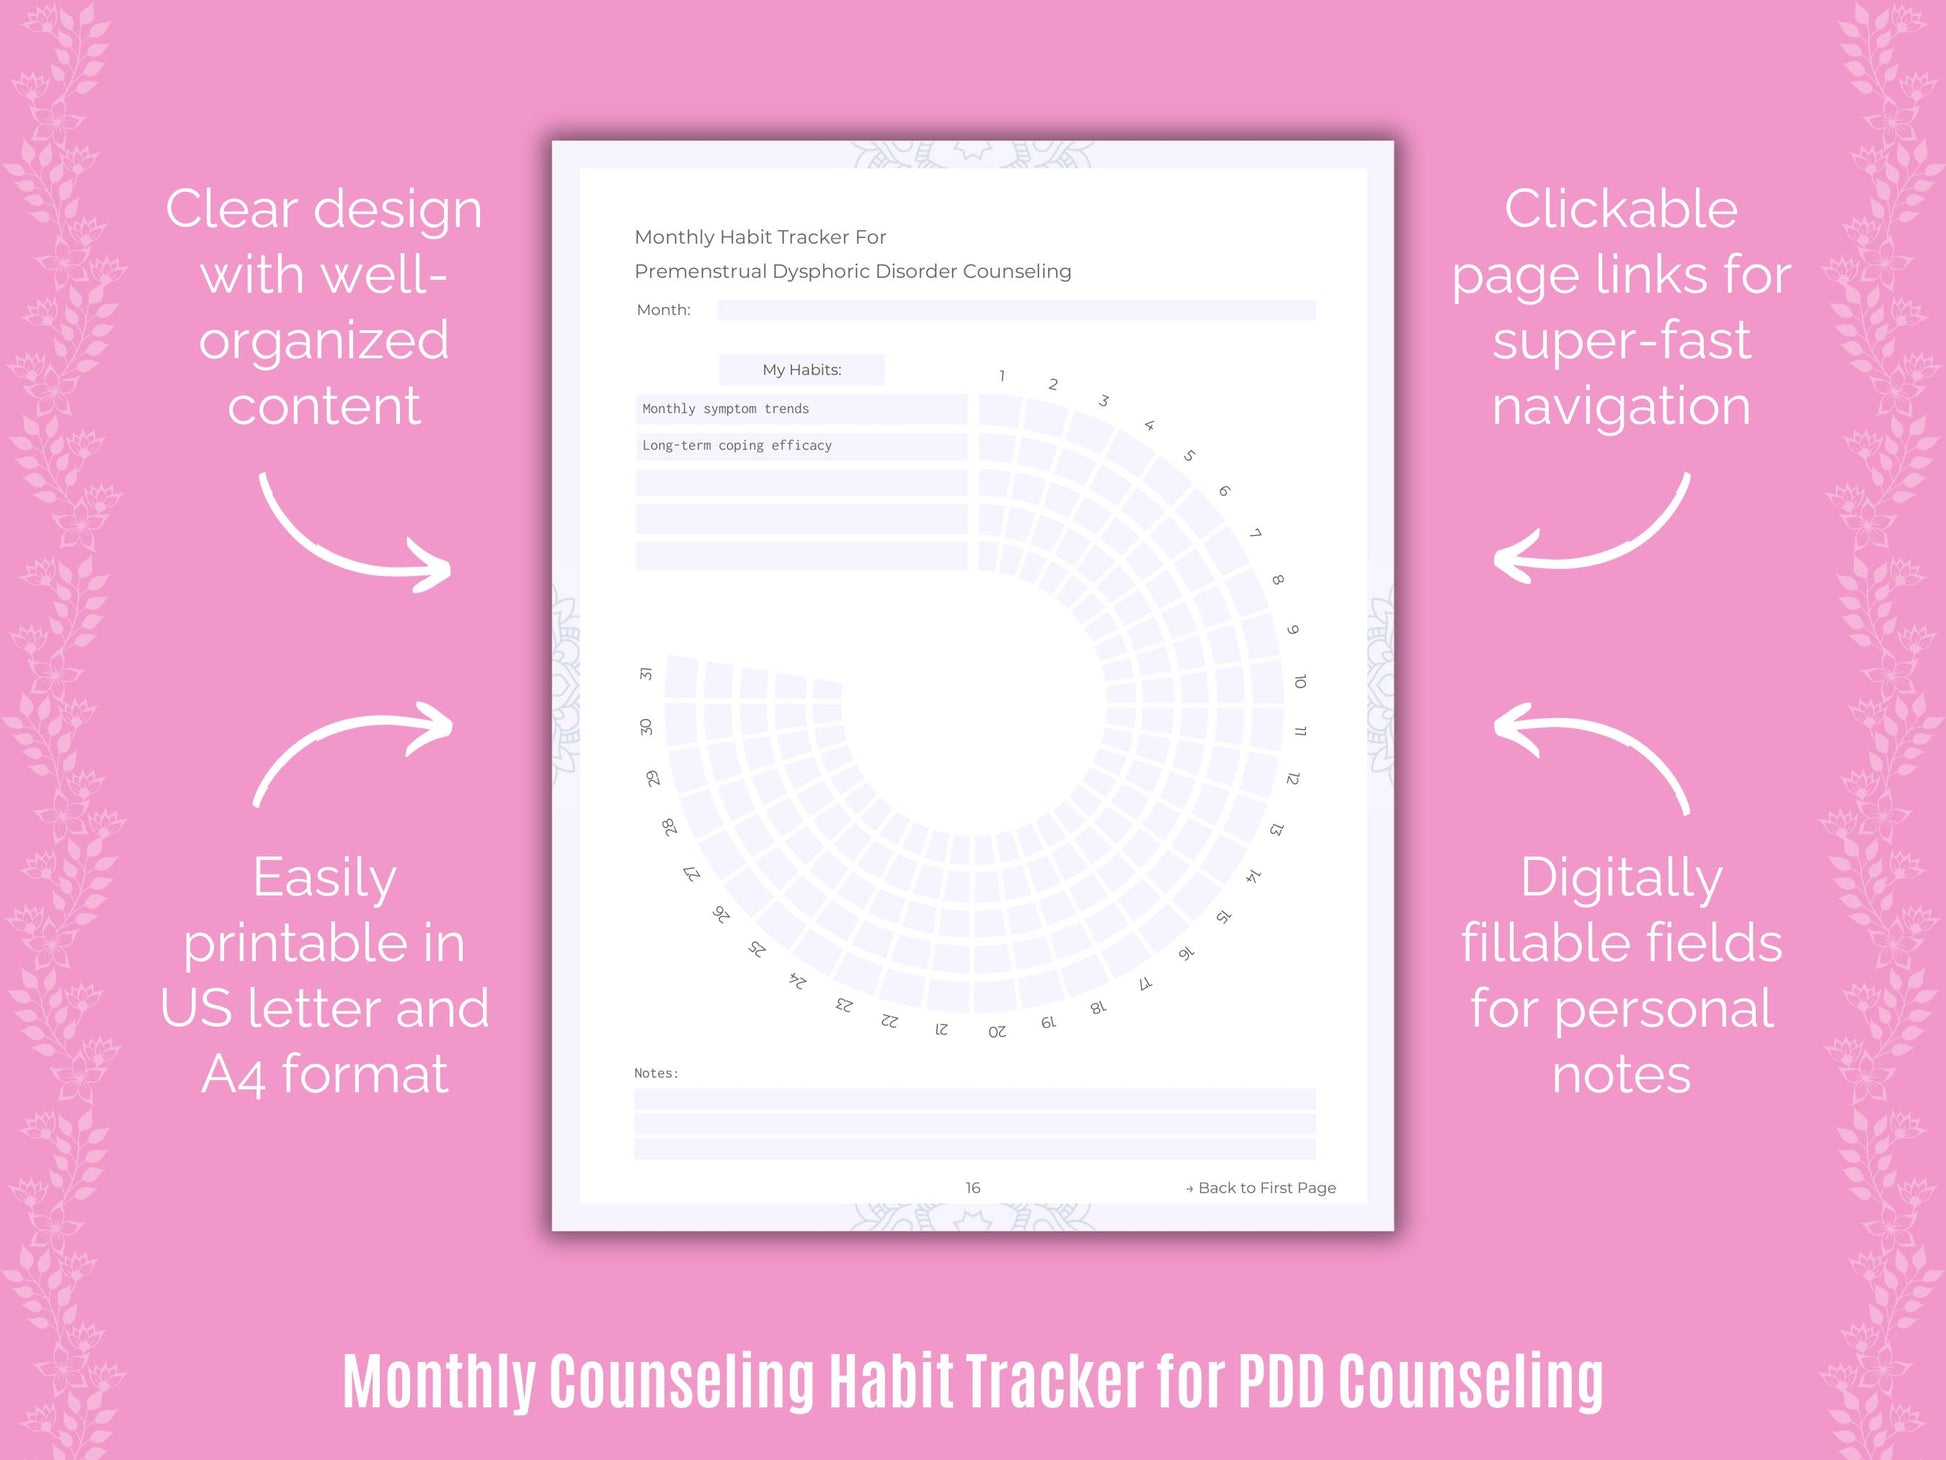 Premenstrual Dysphoric Disorder Counseling Cards